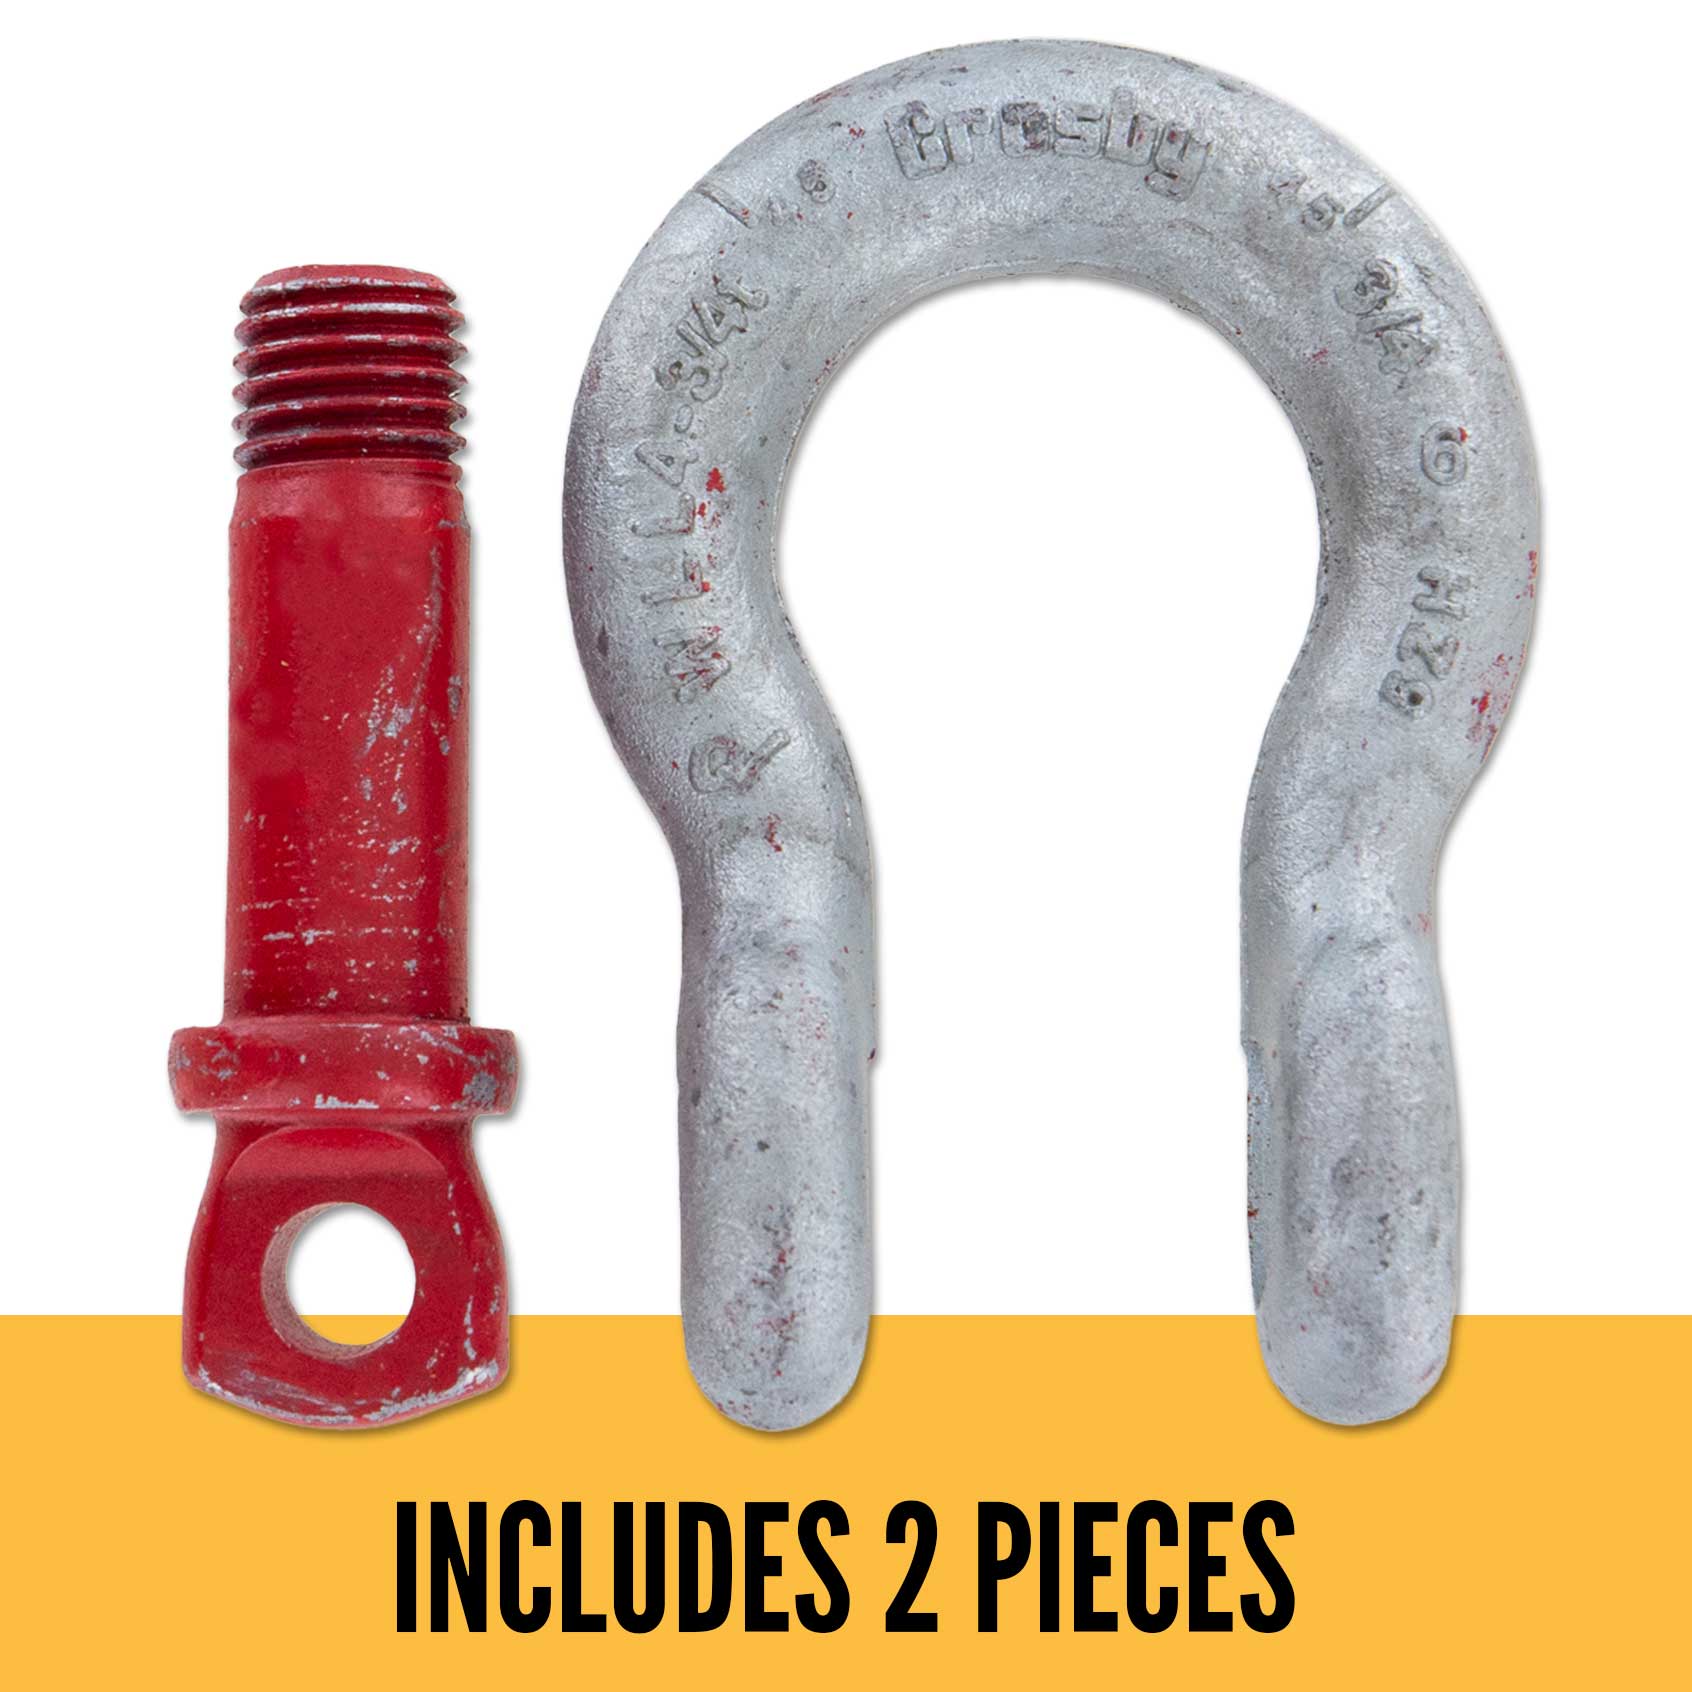 Crosby 1018552 1.12 in. G209 Screw Pin Anchor Shackle Galvanized